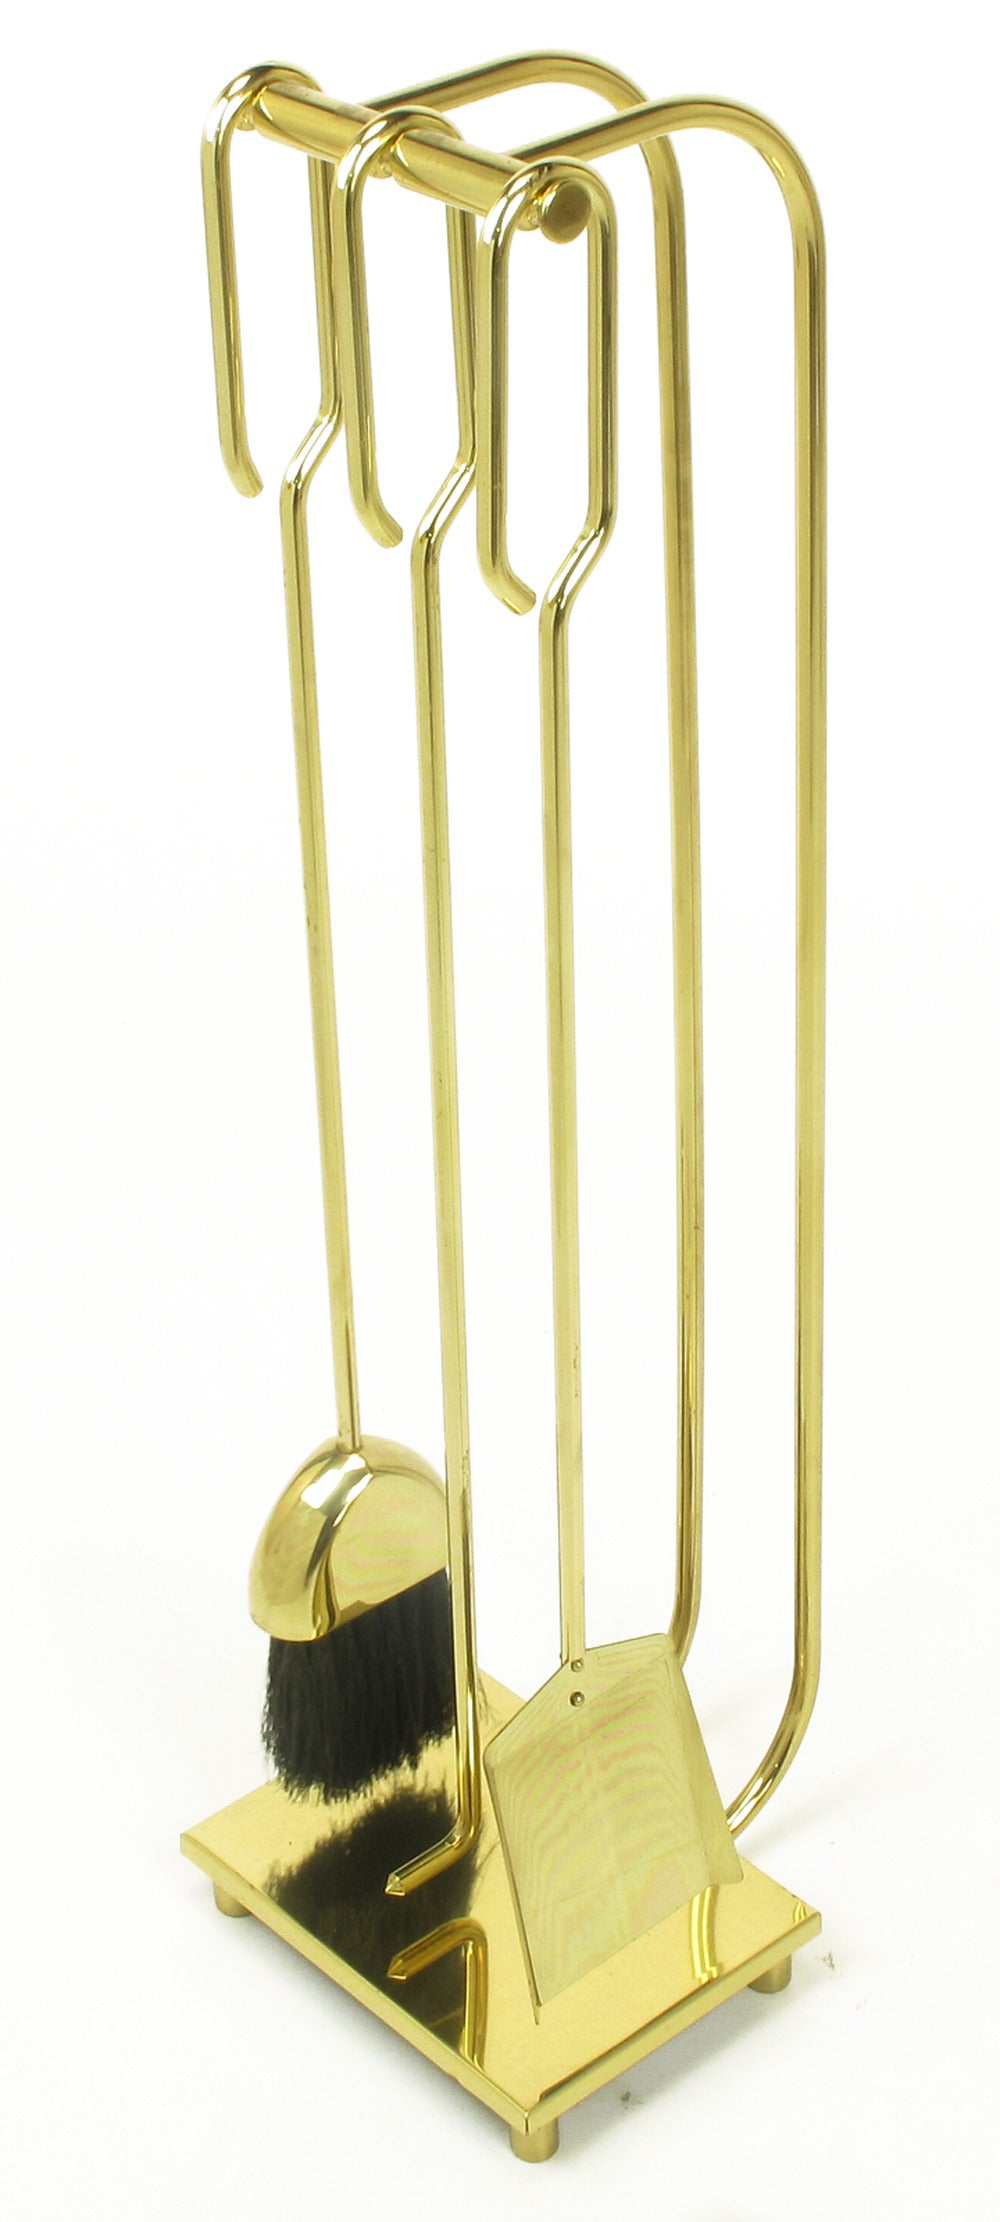 Set of three tools in brass with open end hooks; shovel, broom and angled poker. Hung on brass double curved posts with a brass incised bar and brass plinth base.